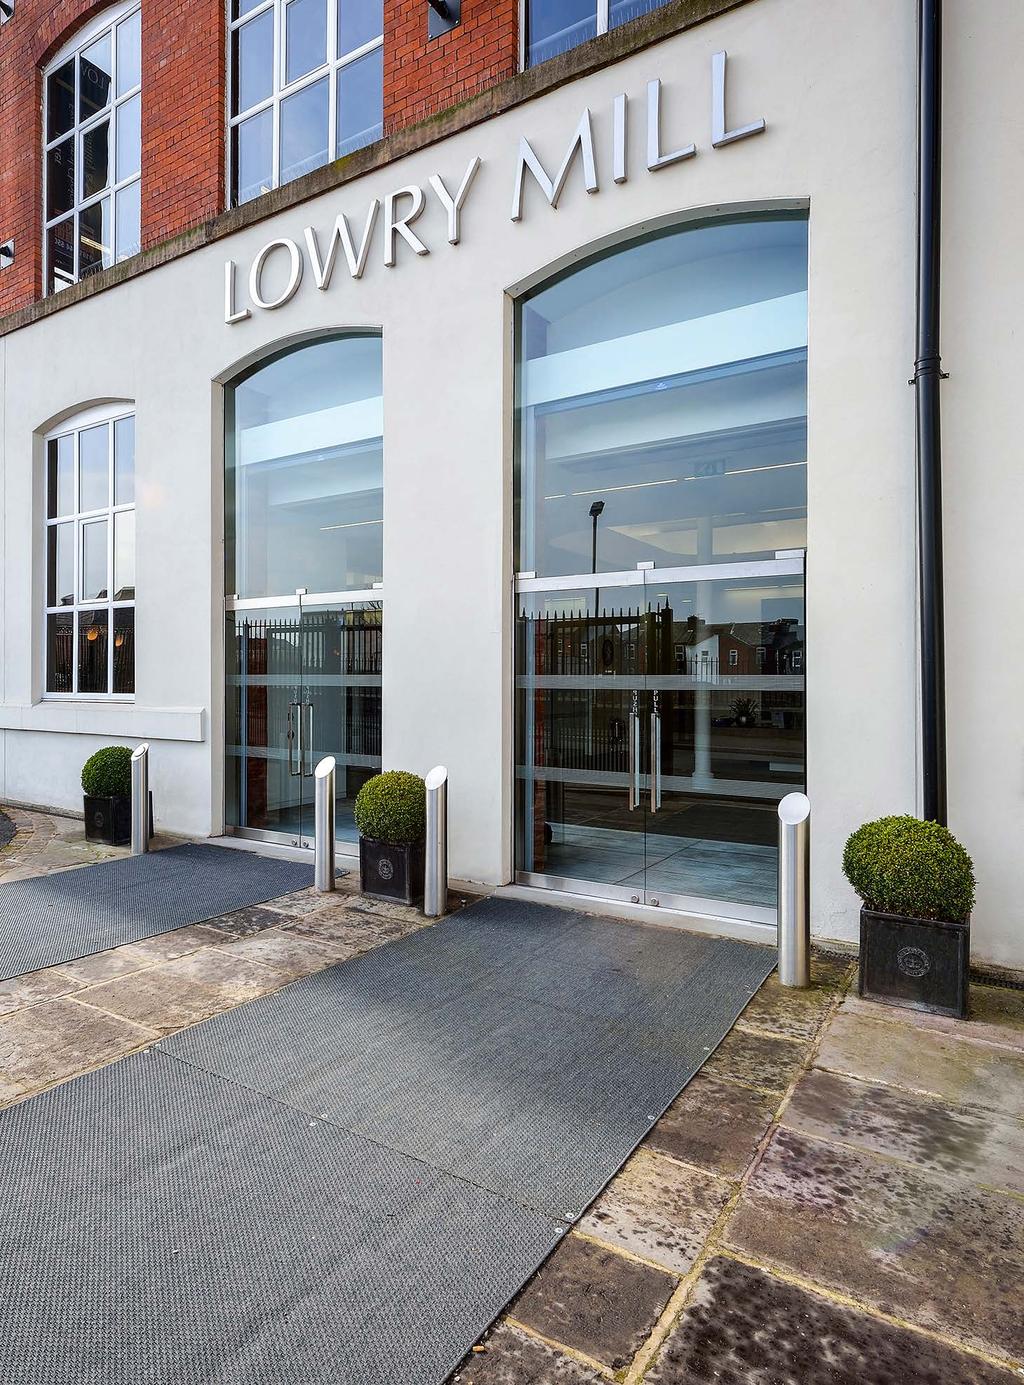 LOWRY To Let Superior Quality Office Accommodation Suites from 1,000-40,000 sq